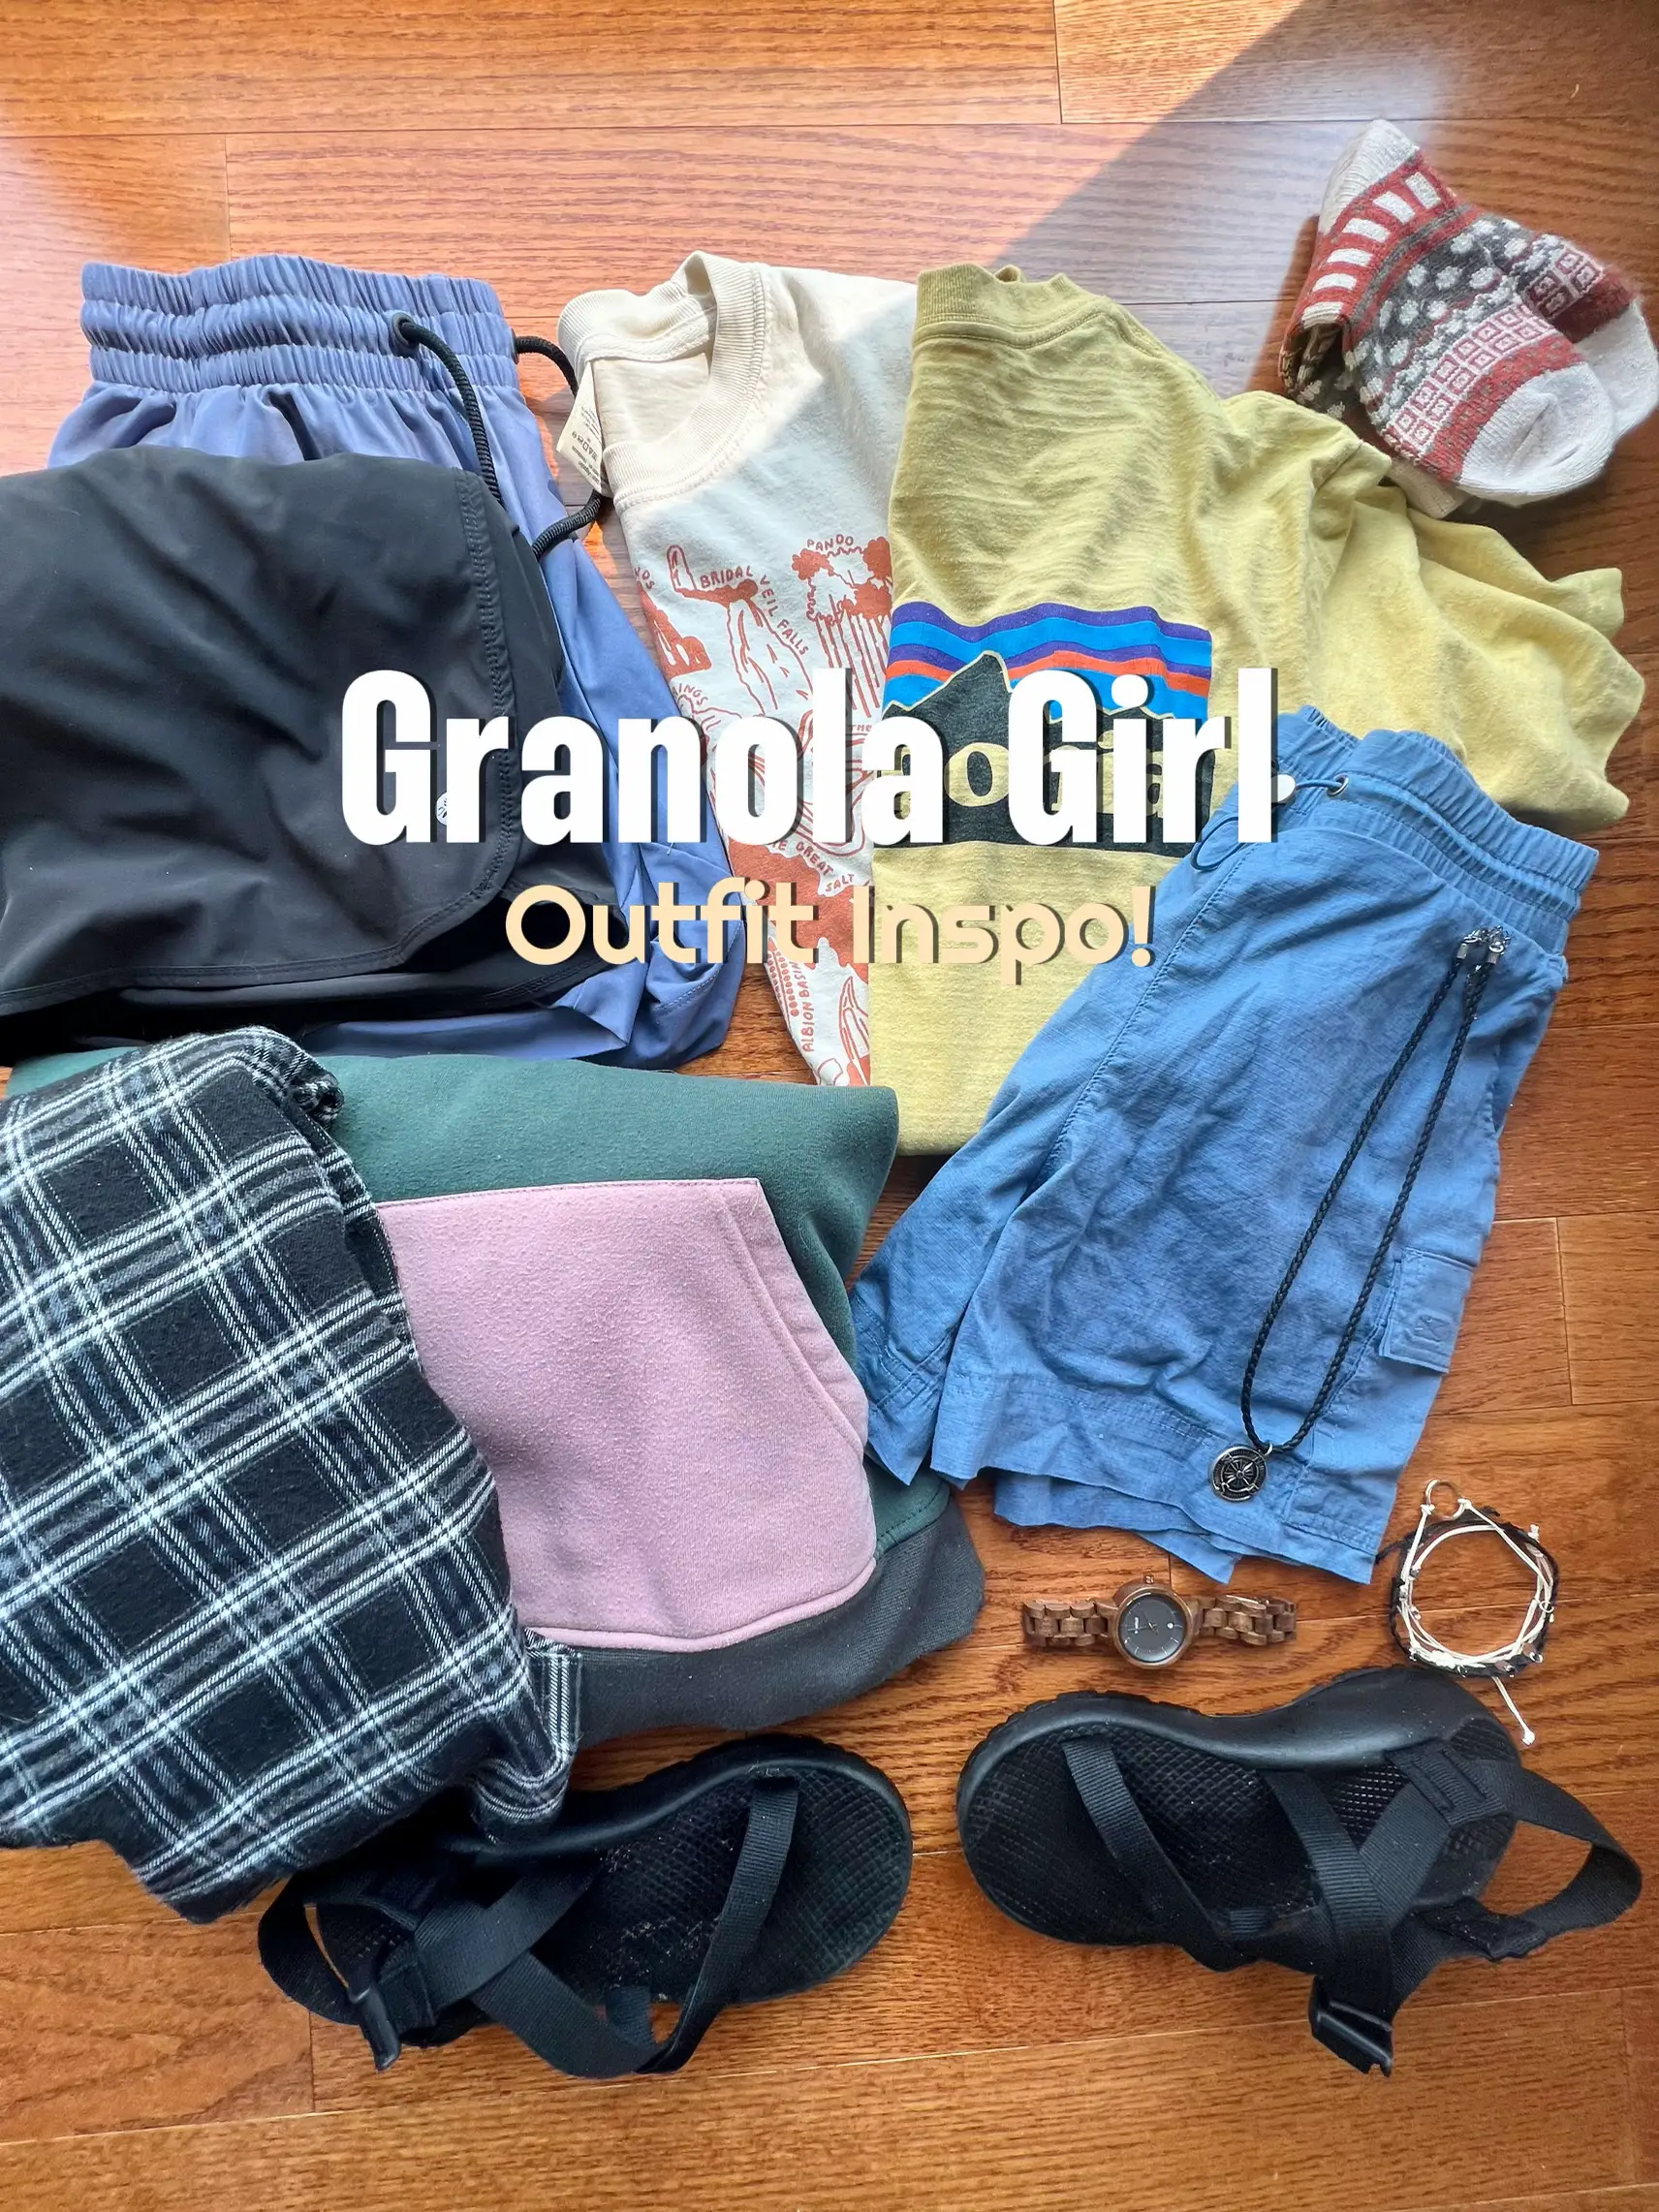 granola girl outfit summer - Lemon8 Search